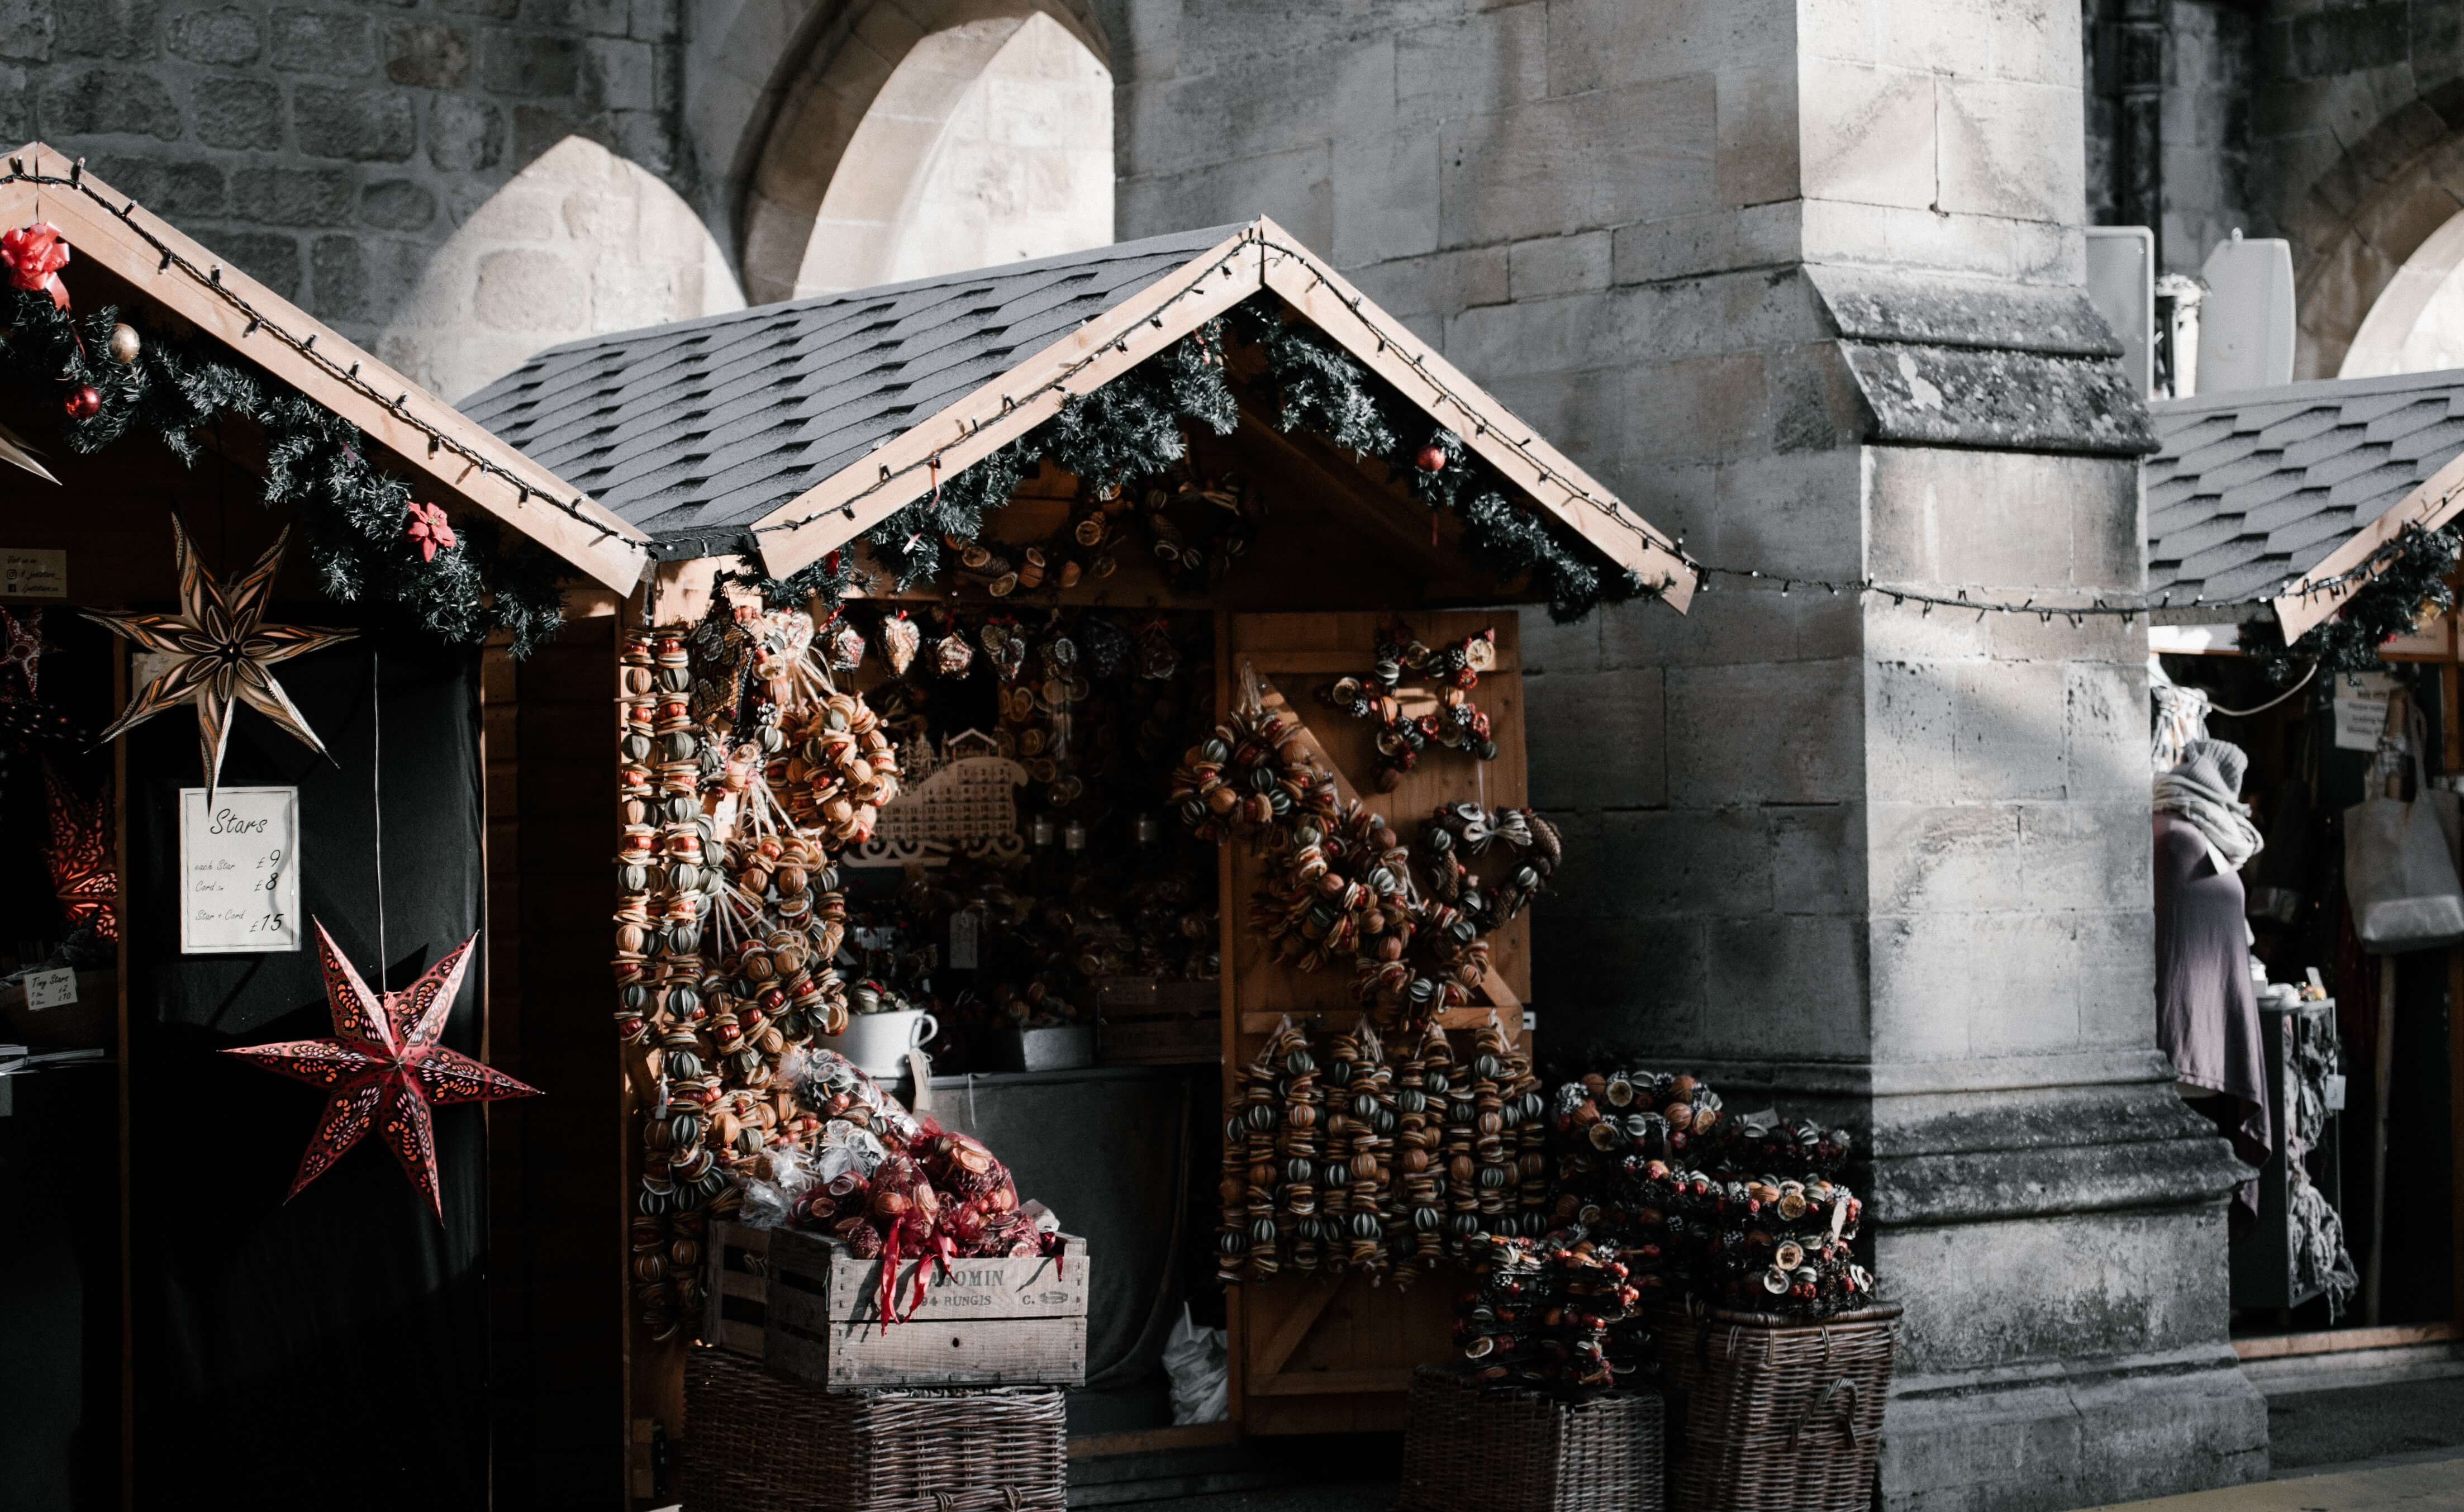 The Best Christmas Markets in Germany